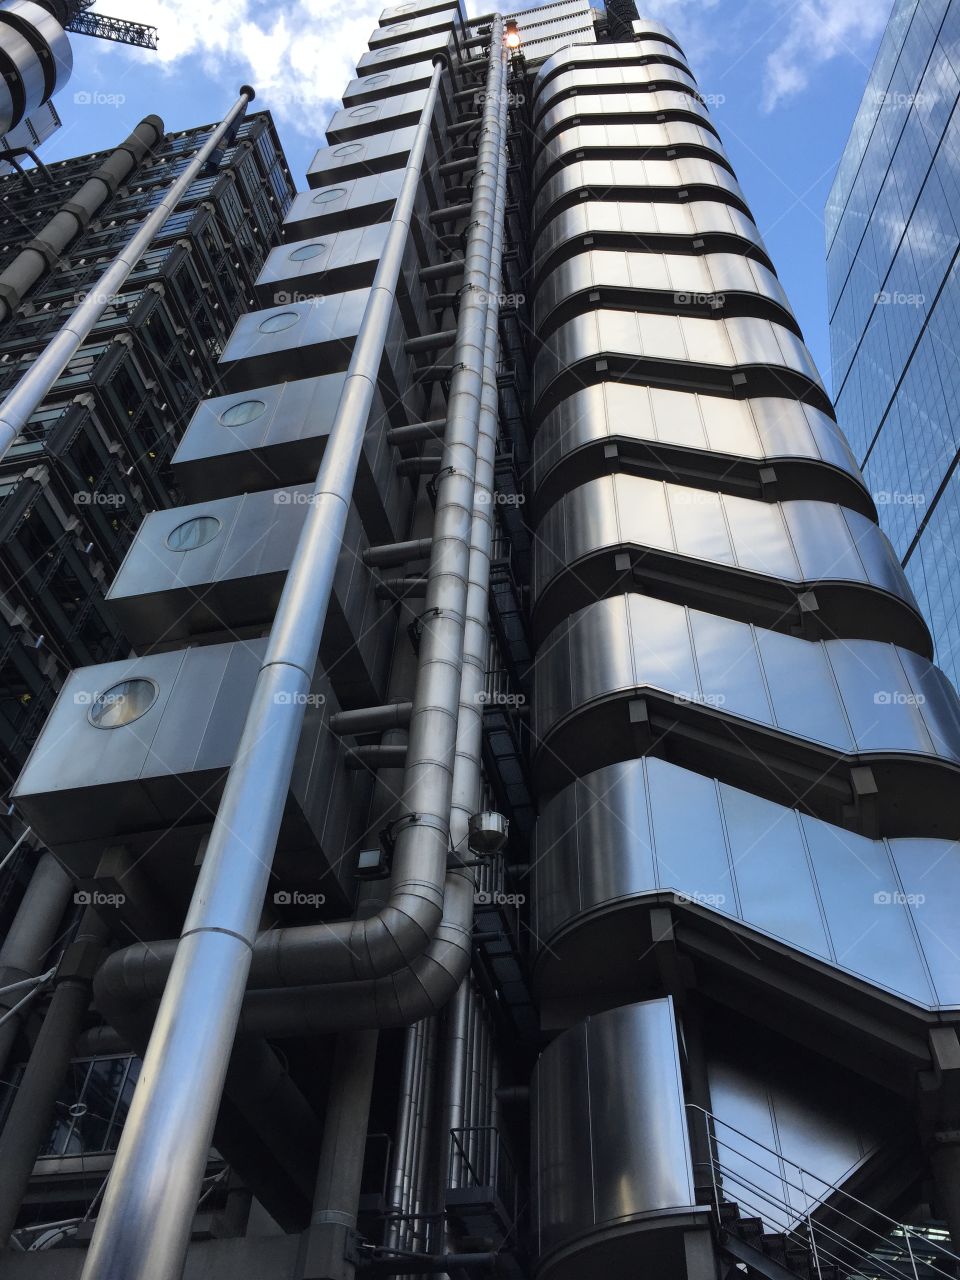 Lloyd’s reflecting the summery blue sky in central London.